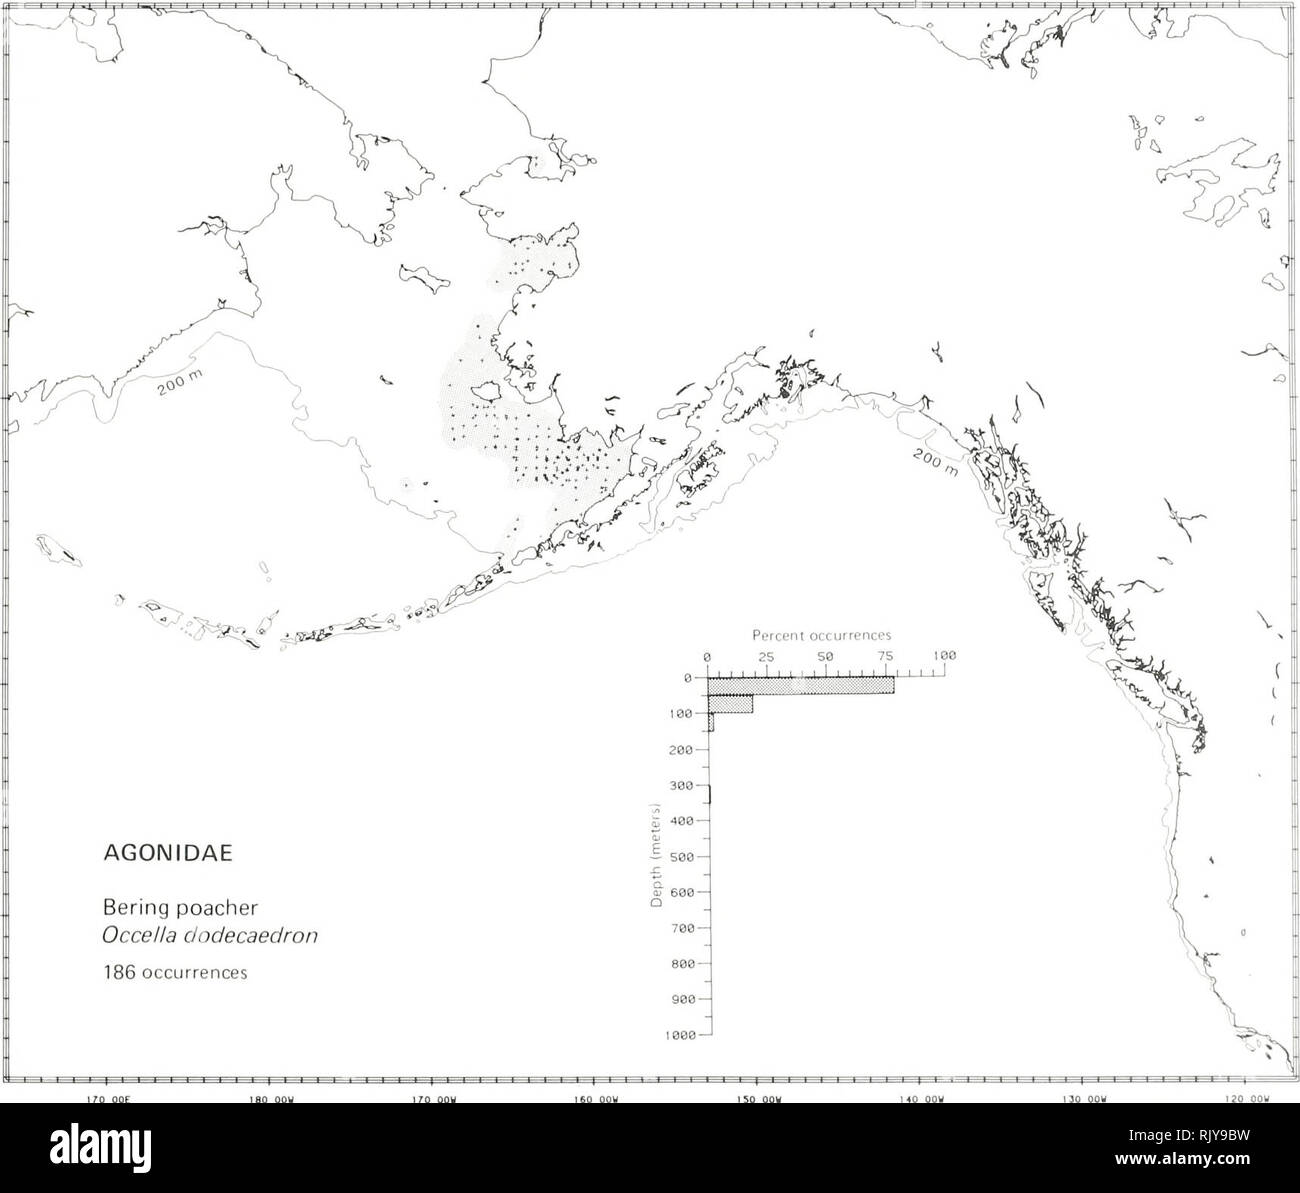 . Atlas and zoogeography of common fishes in the Bering Sea and Northeastern Pacific / M. James Allen, Gary B. Smith. Fishes Bering Sea Geographical distribution.. BERING POACHER, Occella dodecaedron (Tilesius 1813) Agonidae: Poachers Literature Reported from the northern Sea of Japan and the Sea of Okhotsk to Olyutorski Bay and Norton Sound in the Bering Sea to Izembek Lagoon on the Alaska Peninsula (Andriyashev 1954; Wilimovsky 1964; Quast and Hall 1972), at depths of 7 to 59 m (Howe 1981). Survey data Found from Kotzebue Sound in the Chukchi Sea south along the Alaskan coast of the eastern  Stock Photo